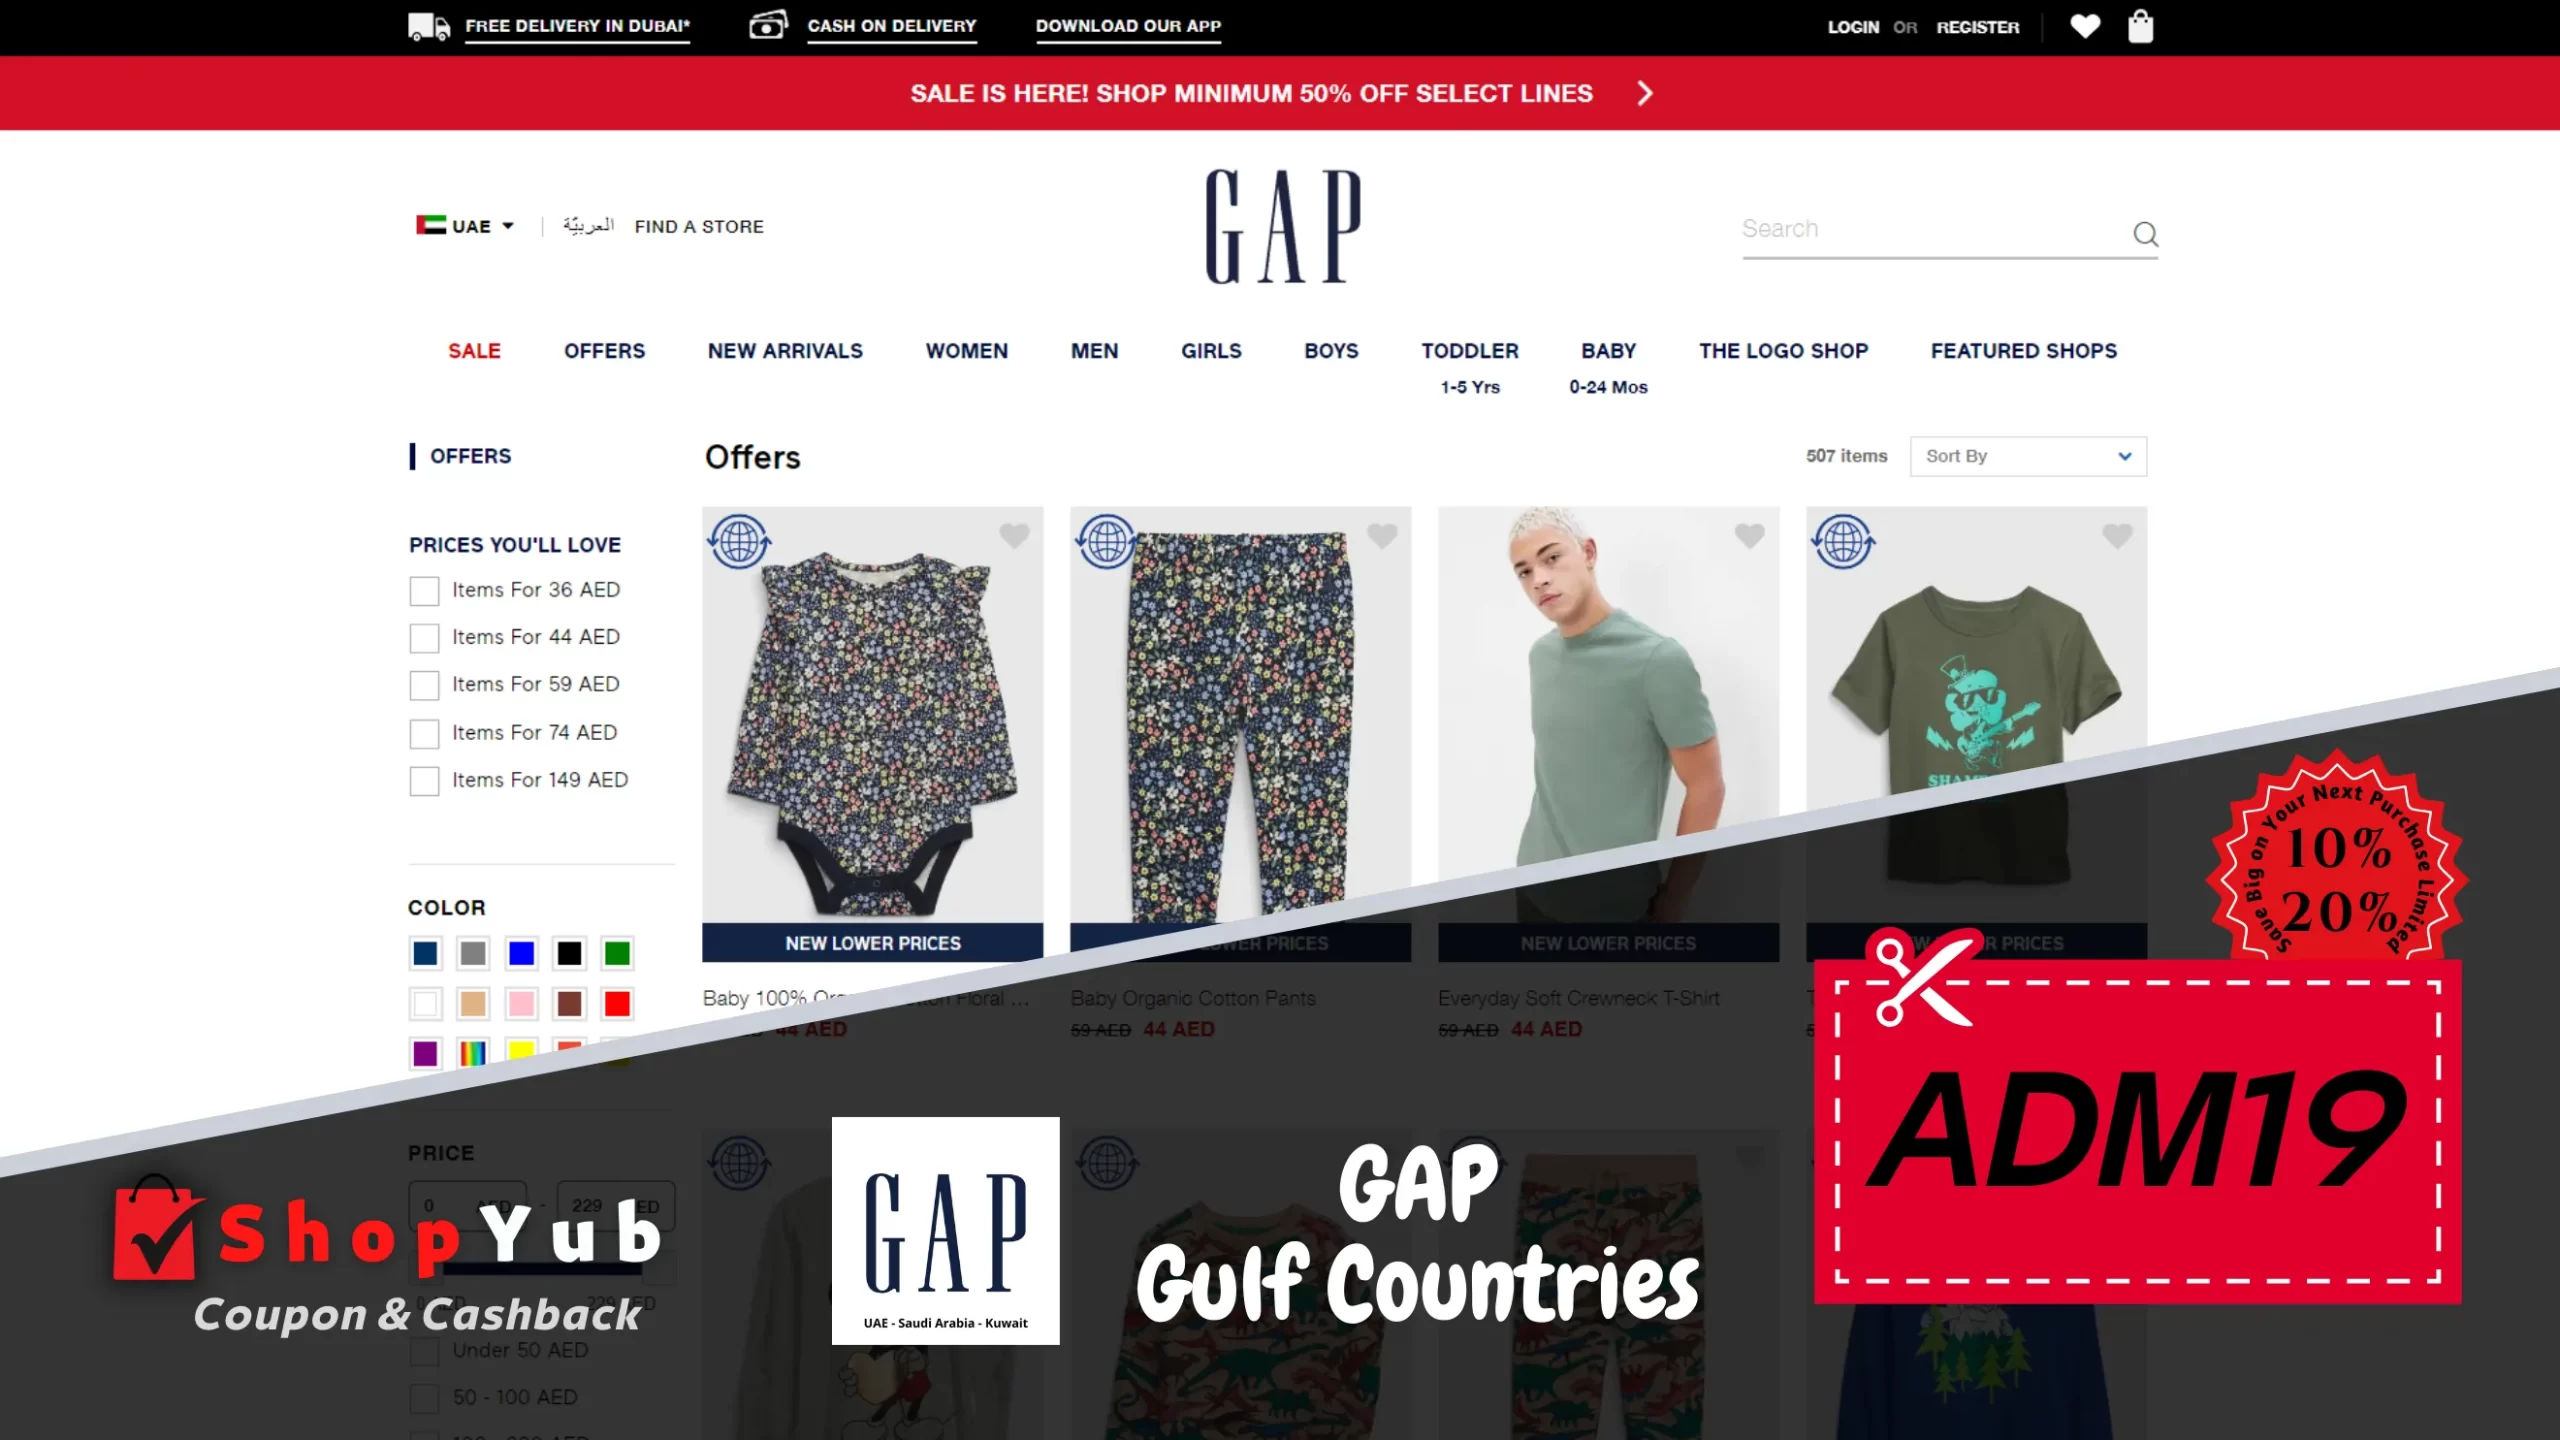 Use GAP Coupon Code: ADM19 | Verified GAP Coupons for UAE, KSA, KWT | 10% - 20% Off GAP Discount Codes Fashion online | March 2024.